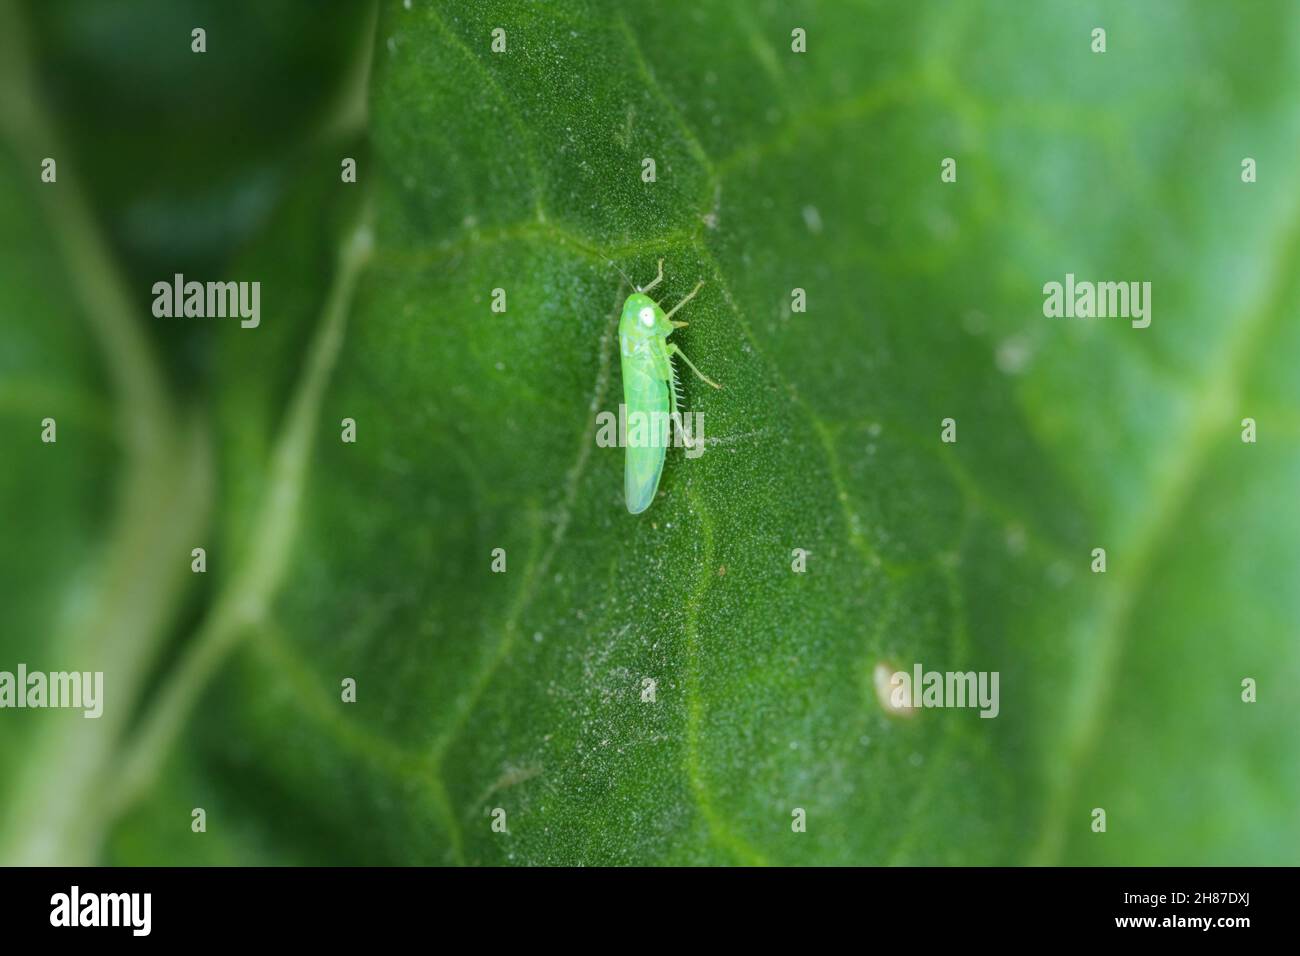 Potato leafhopper (Empoasca) belongs to family Cicadellidae. It is a pest of many types of Crops. Stock Photo